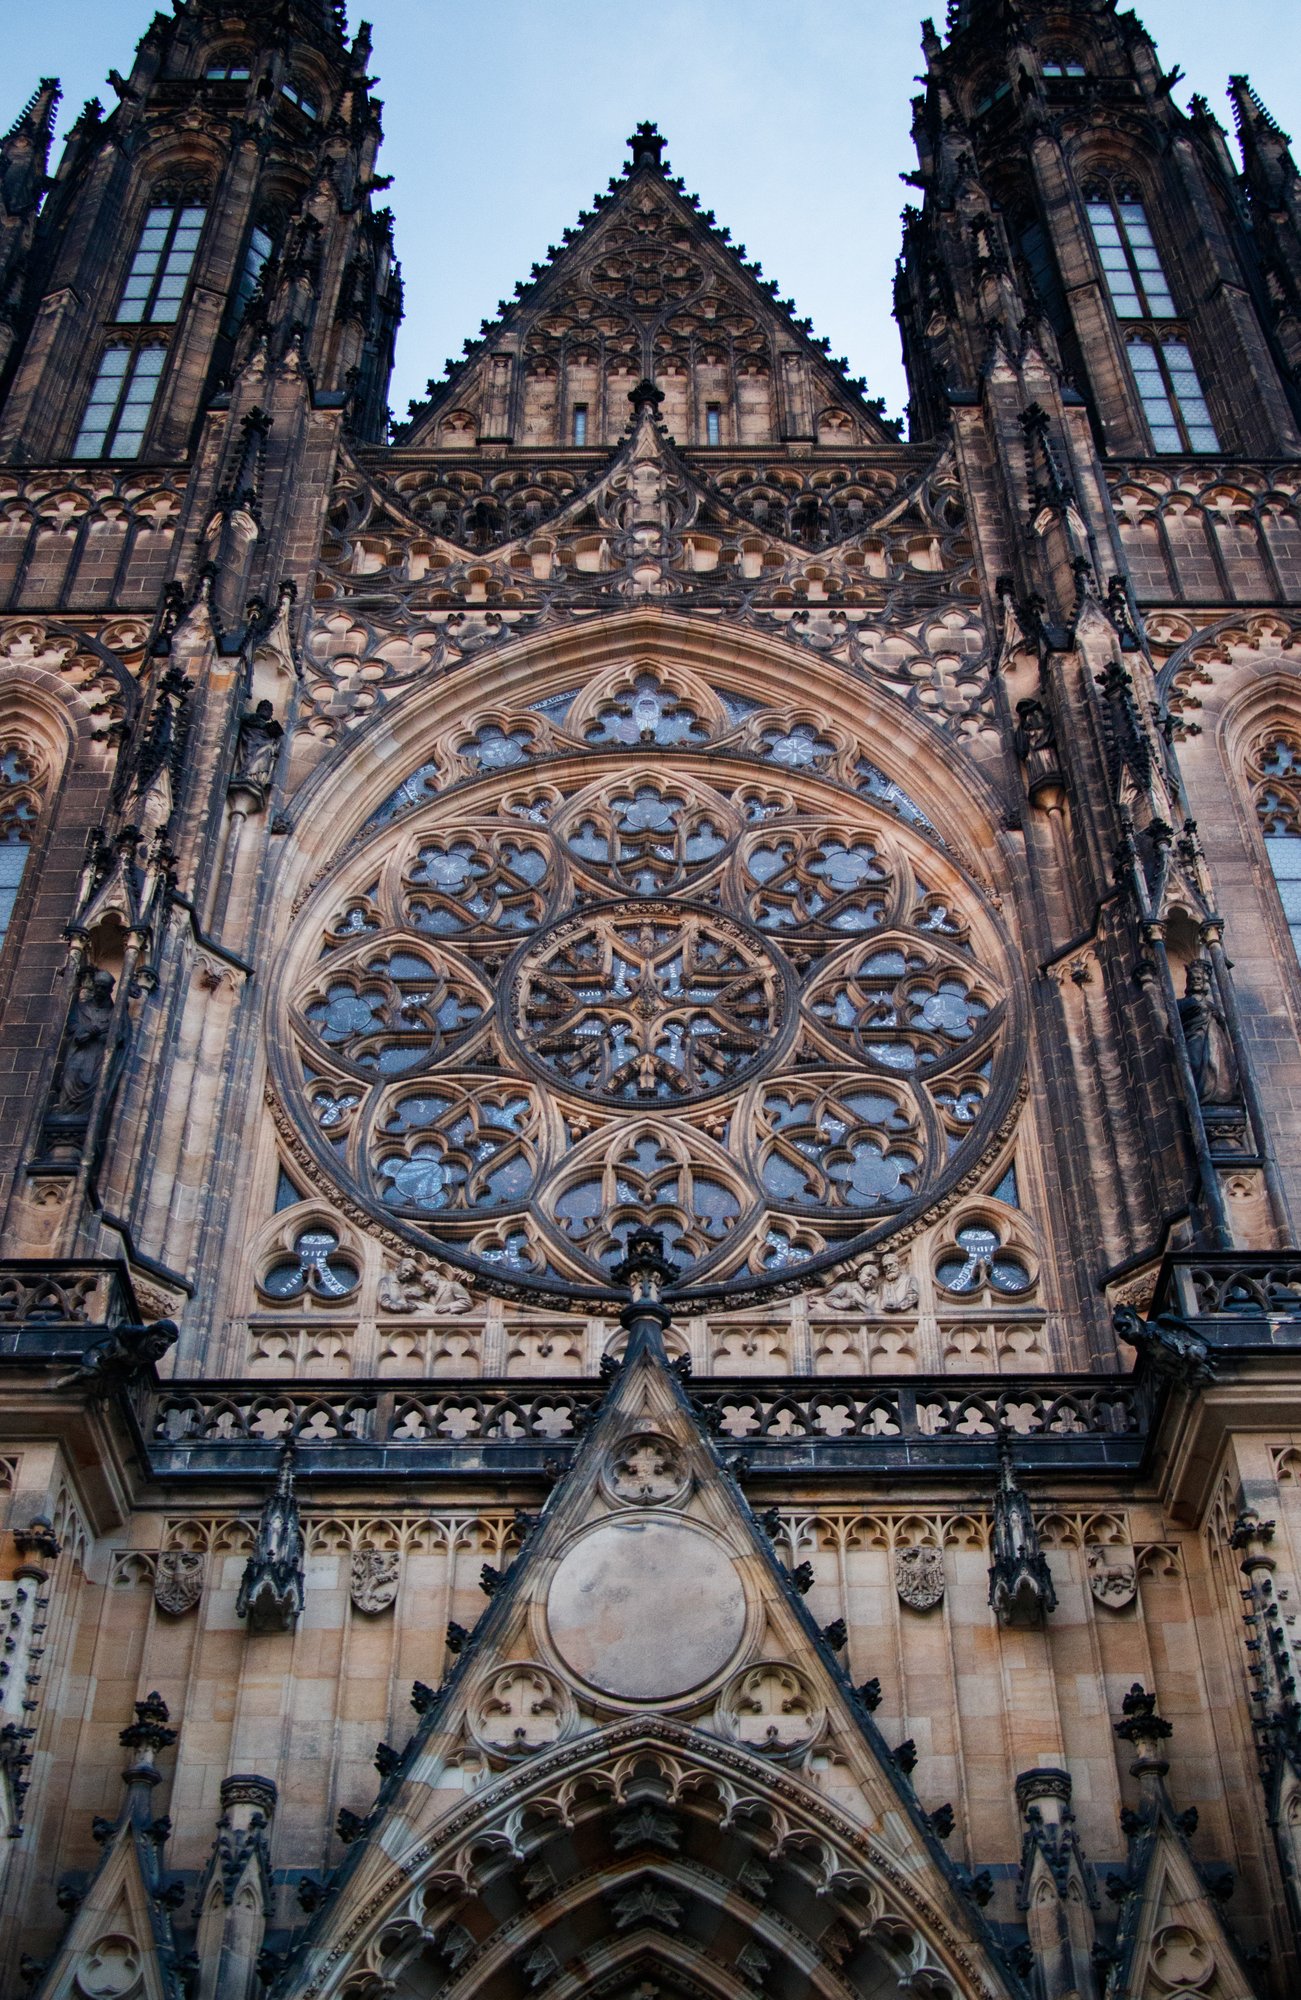 Stained glass window of Prague Castle.